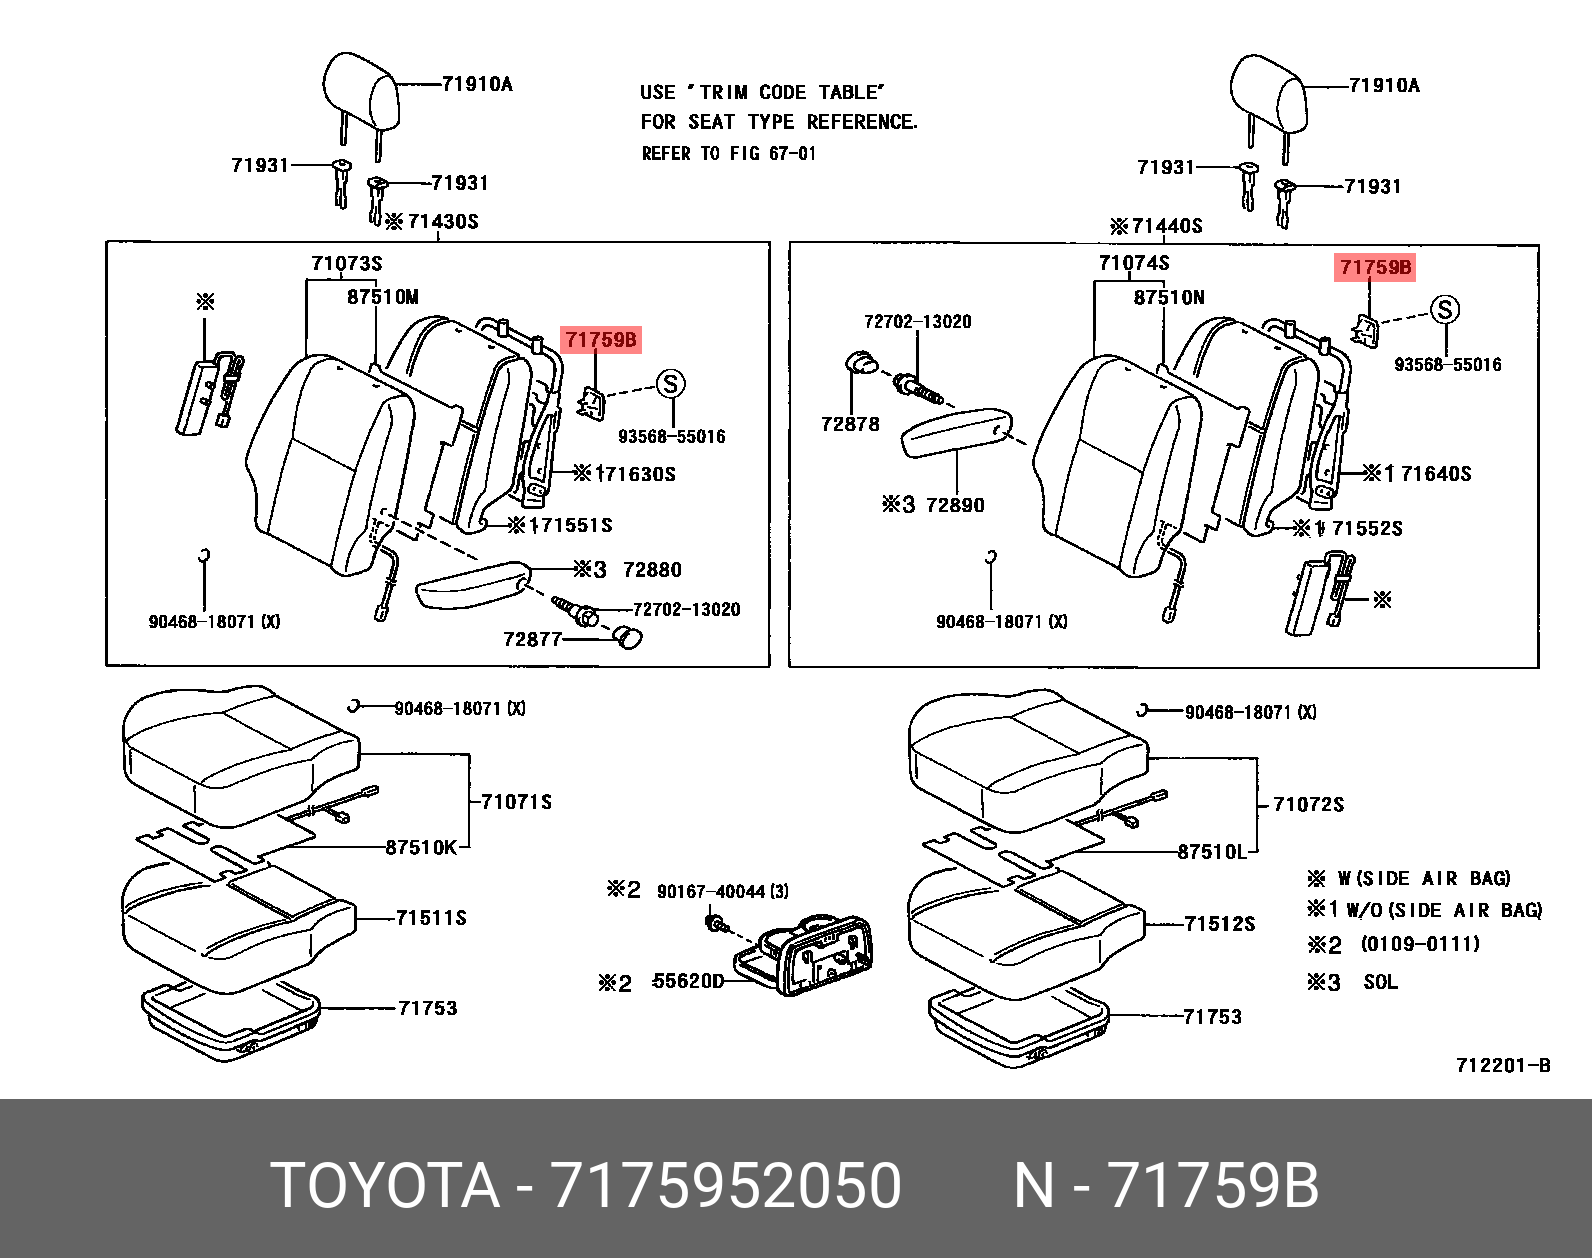 CAMRY 201706-, HOOK, FRONT SEAT BACK, NO.2